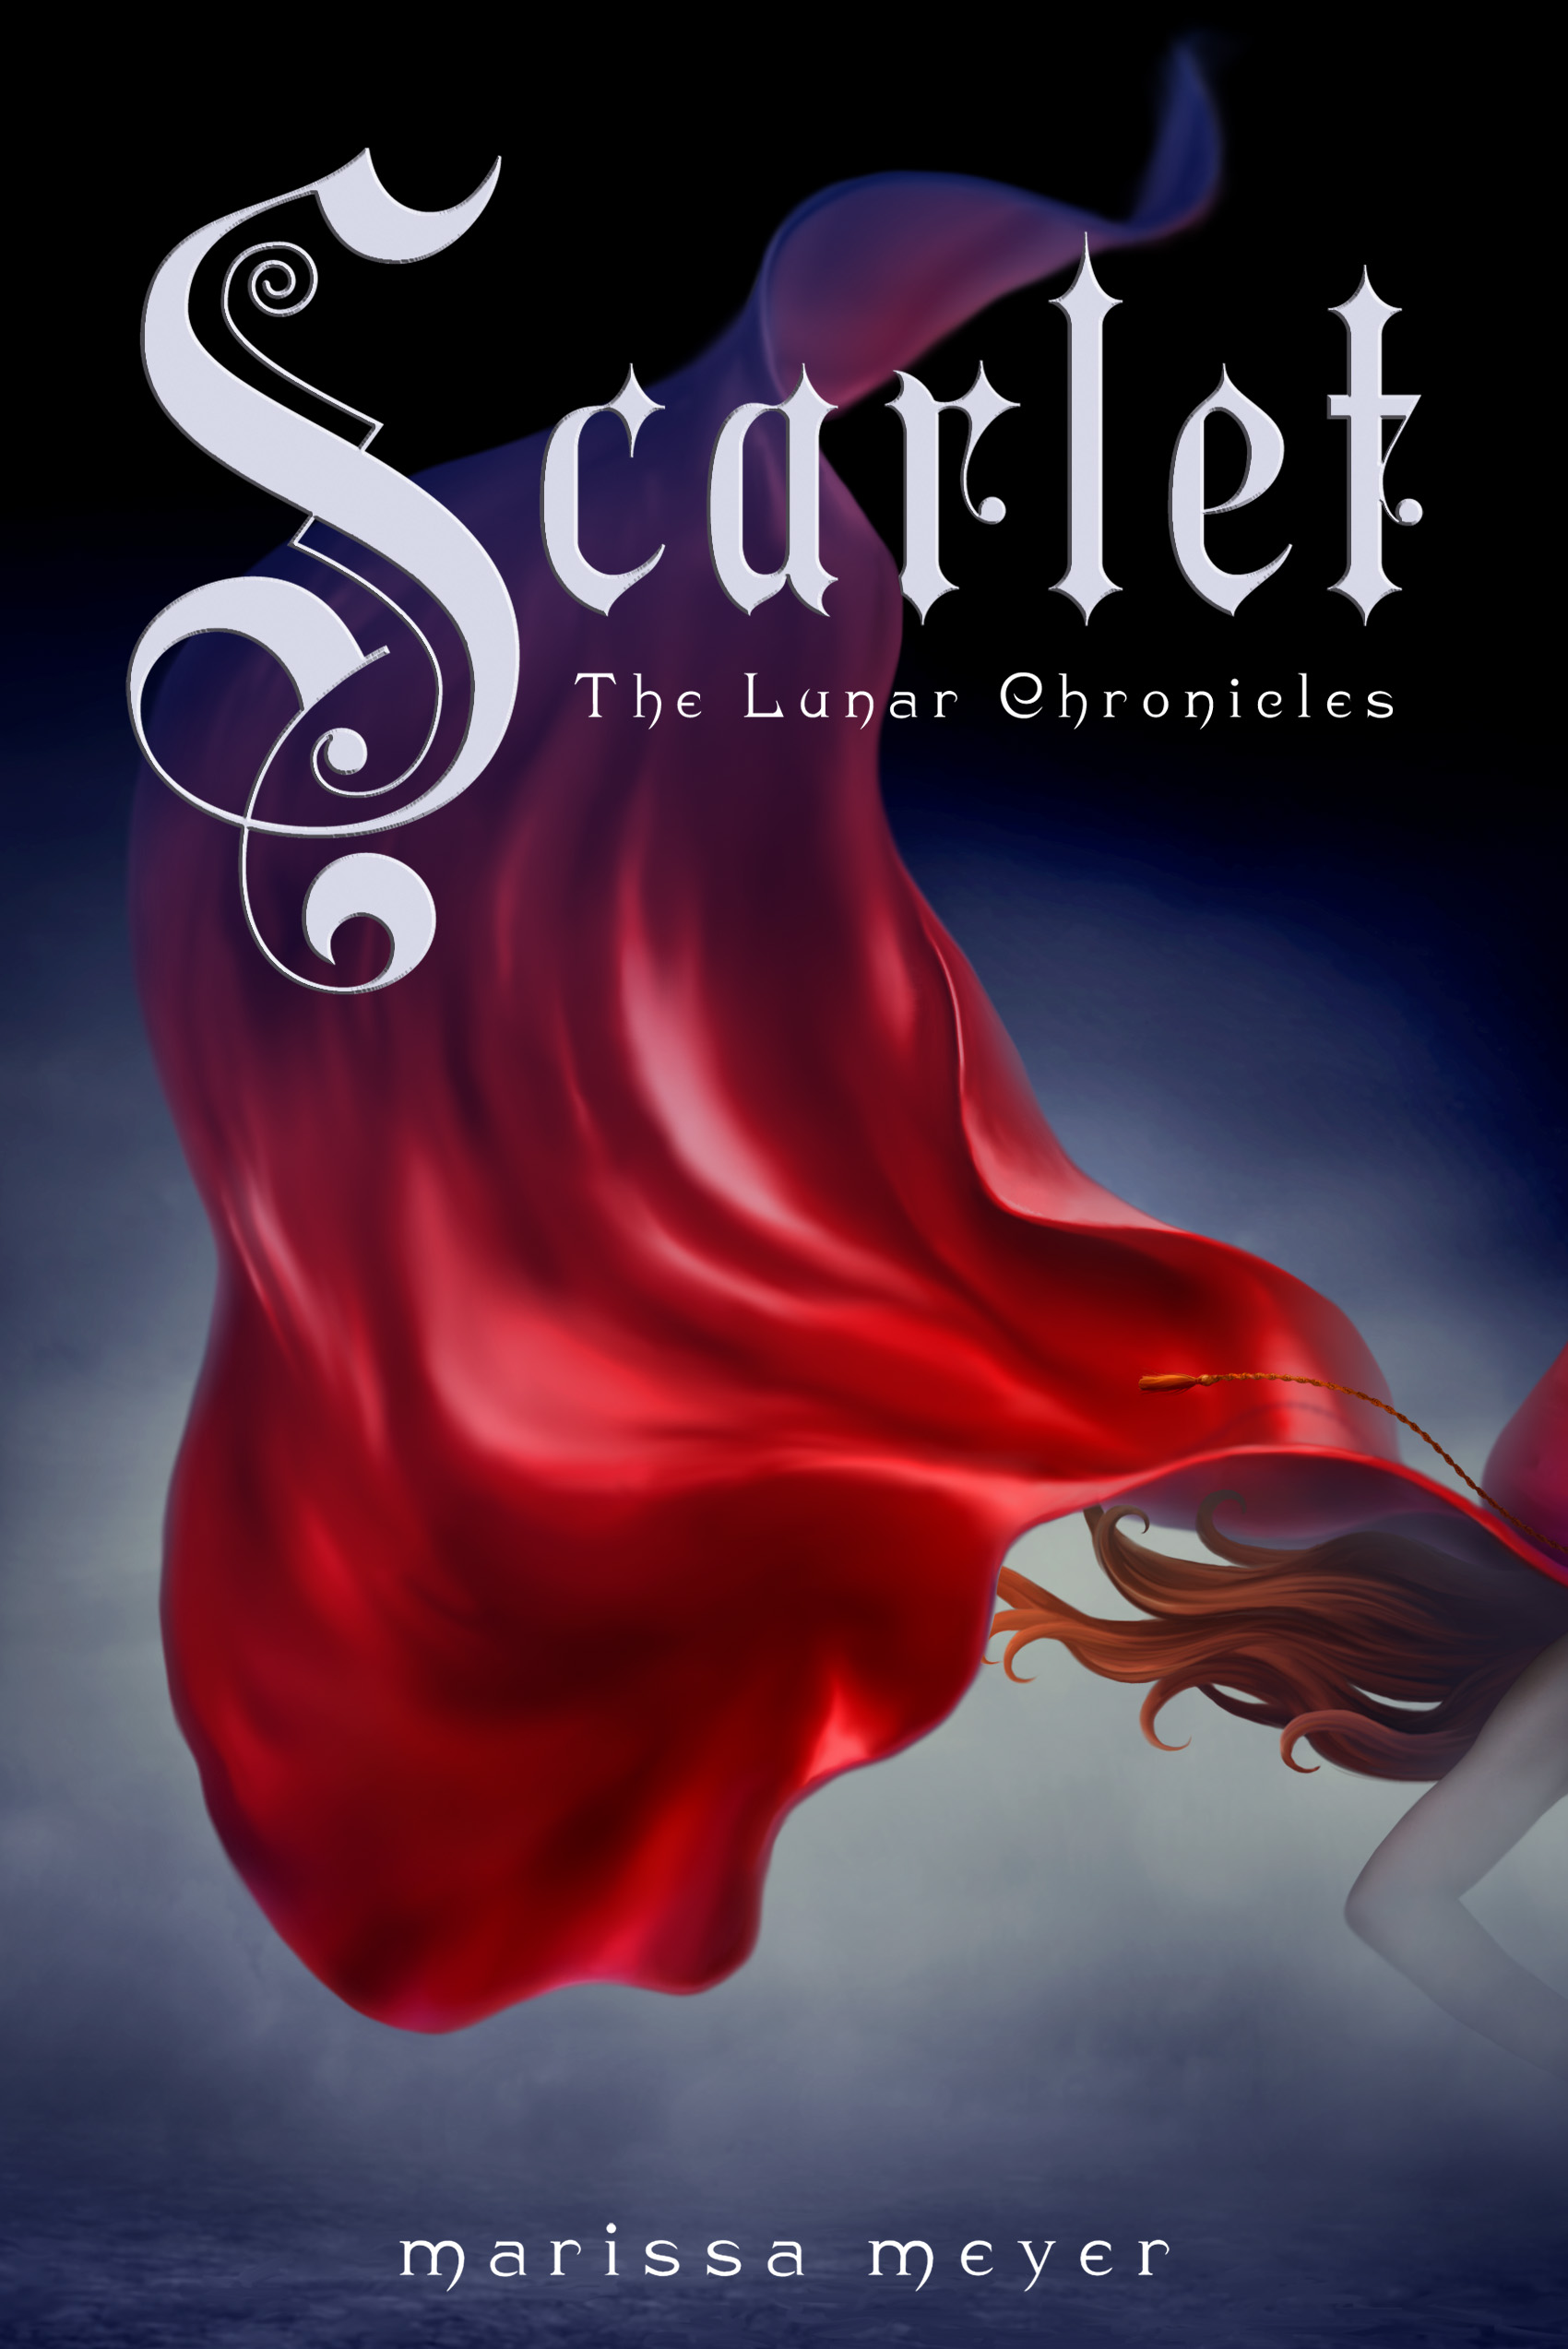 Scarlet (The Lunar Chronicles #2) by Marissa Meyer